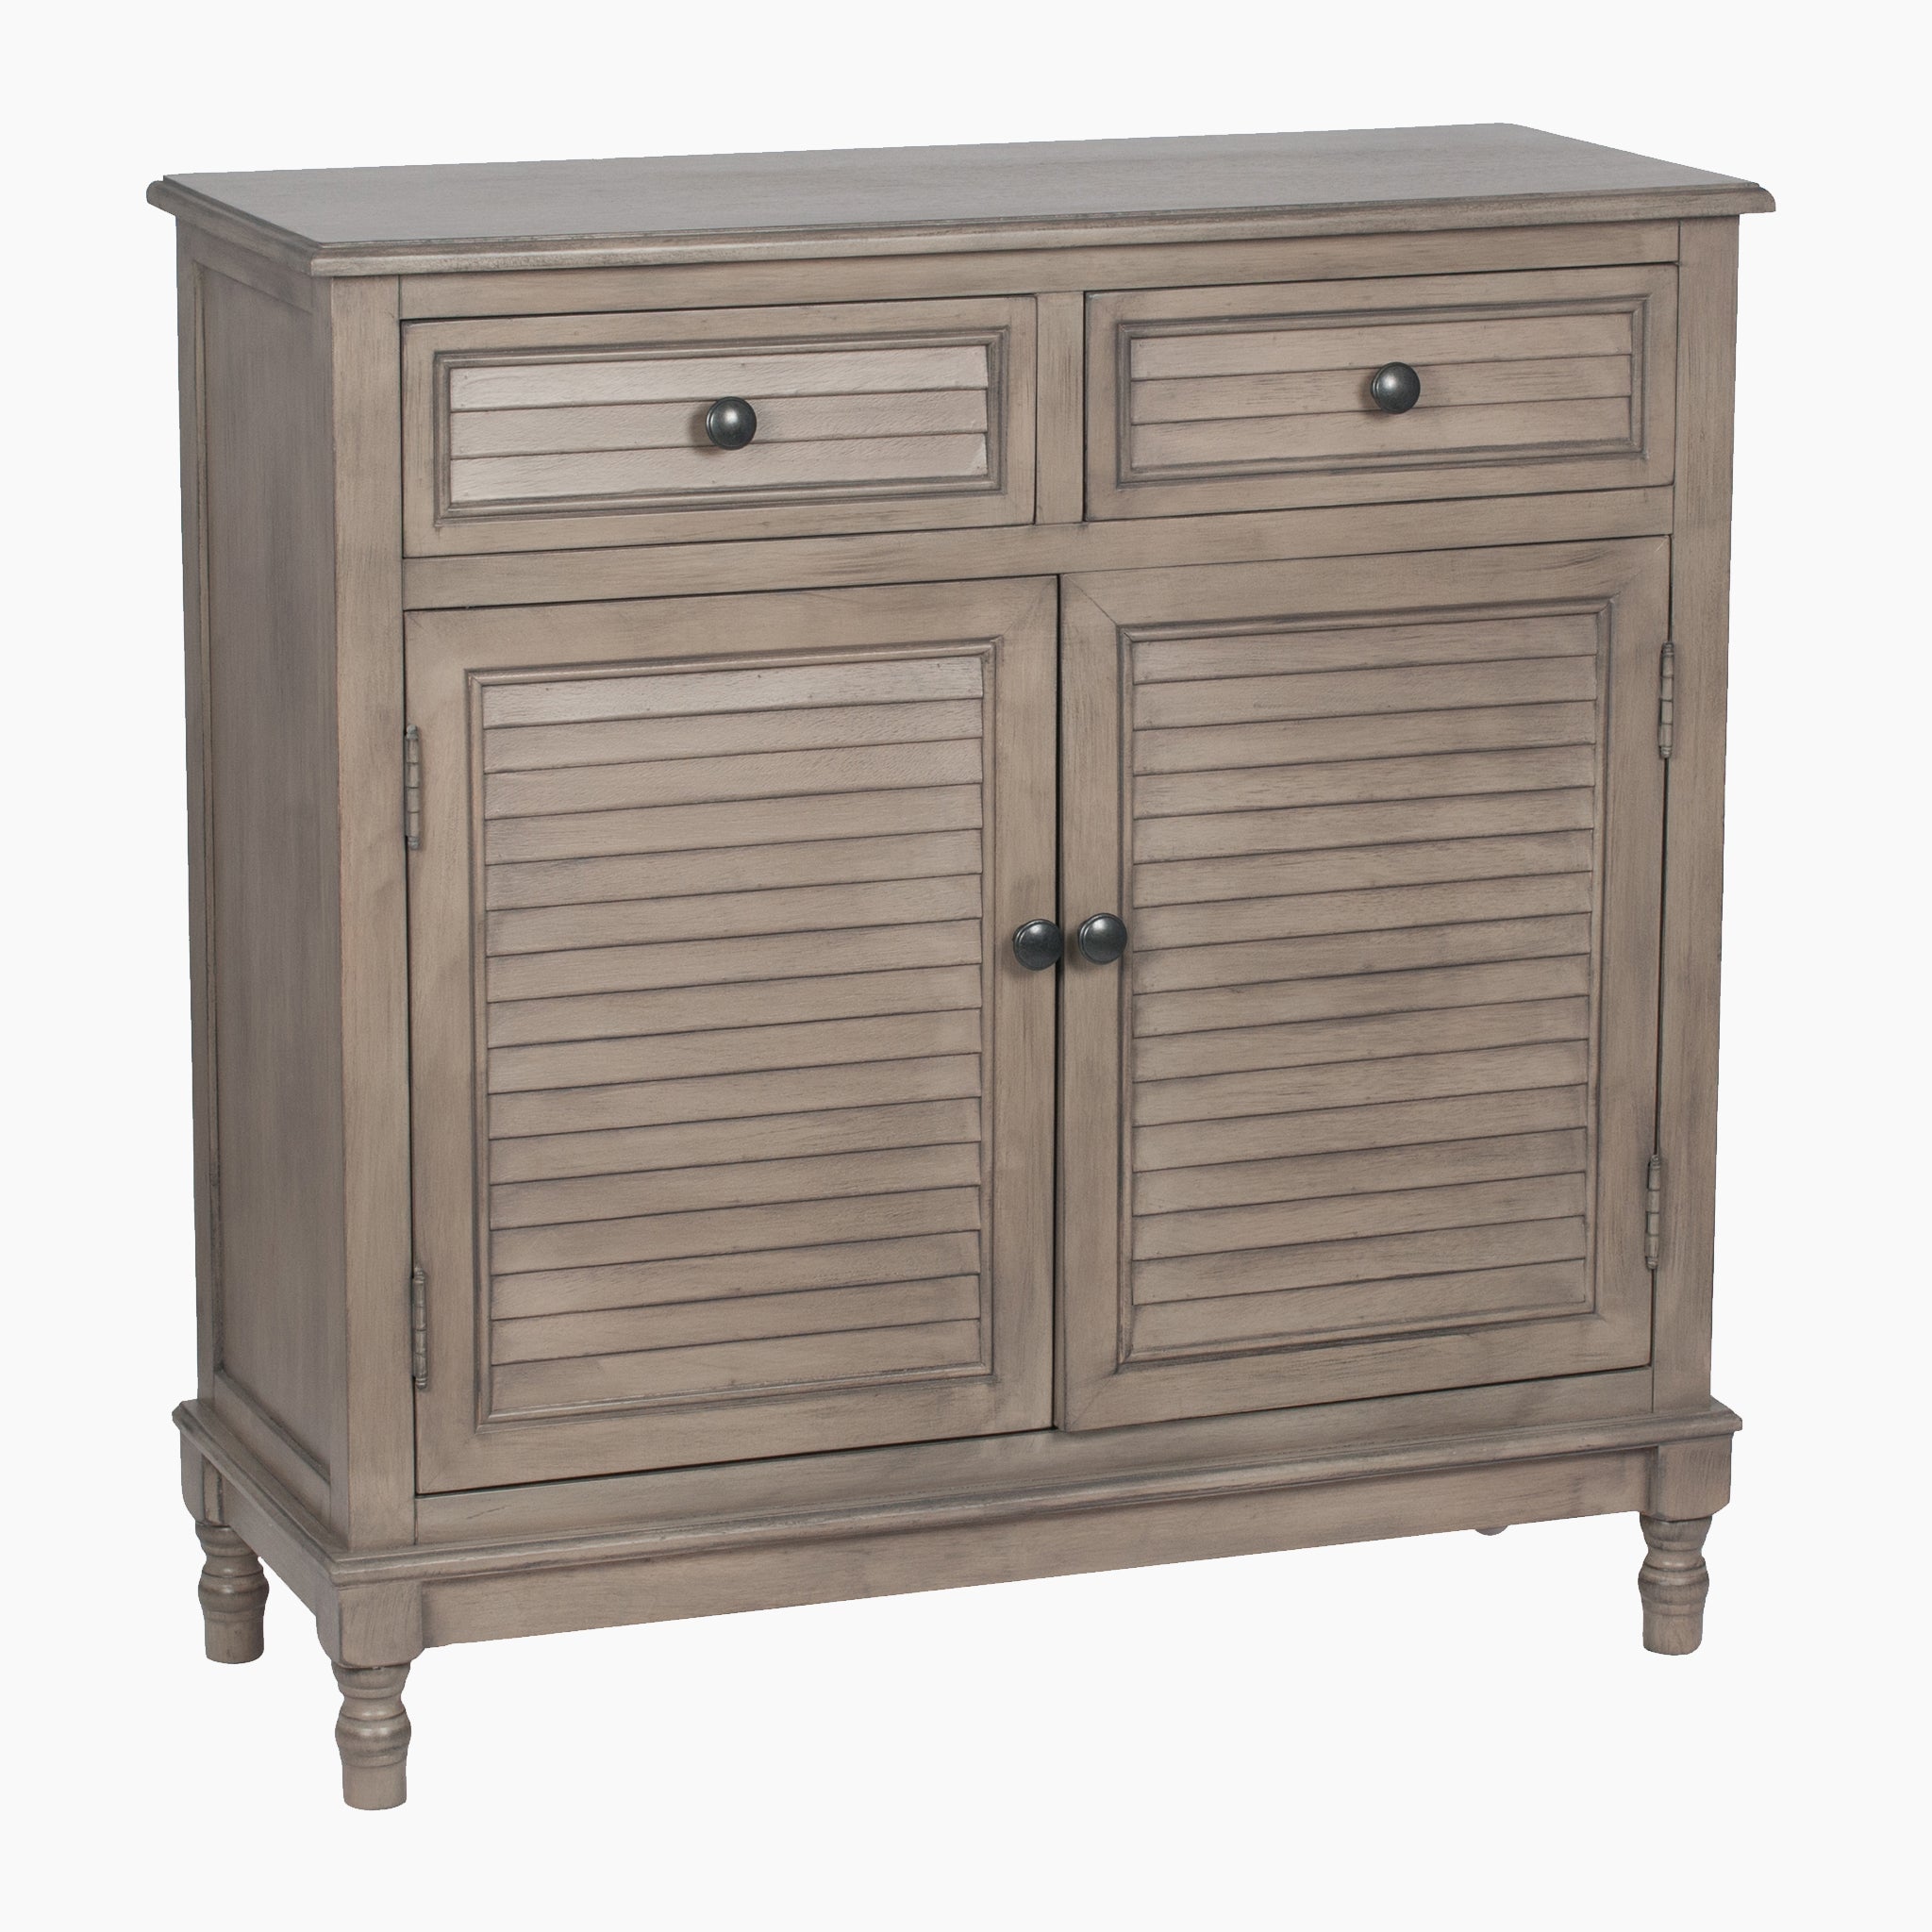 Ashwell Taupe Pine 2 Drawer 2 Door Wood Unit